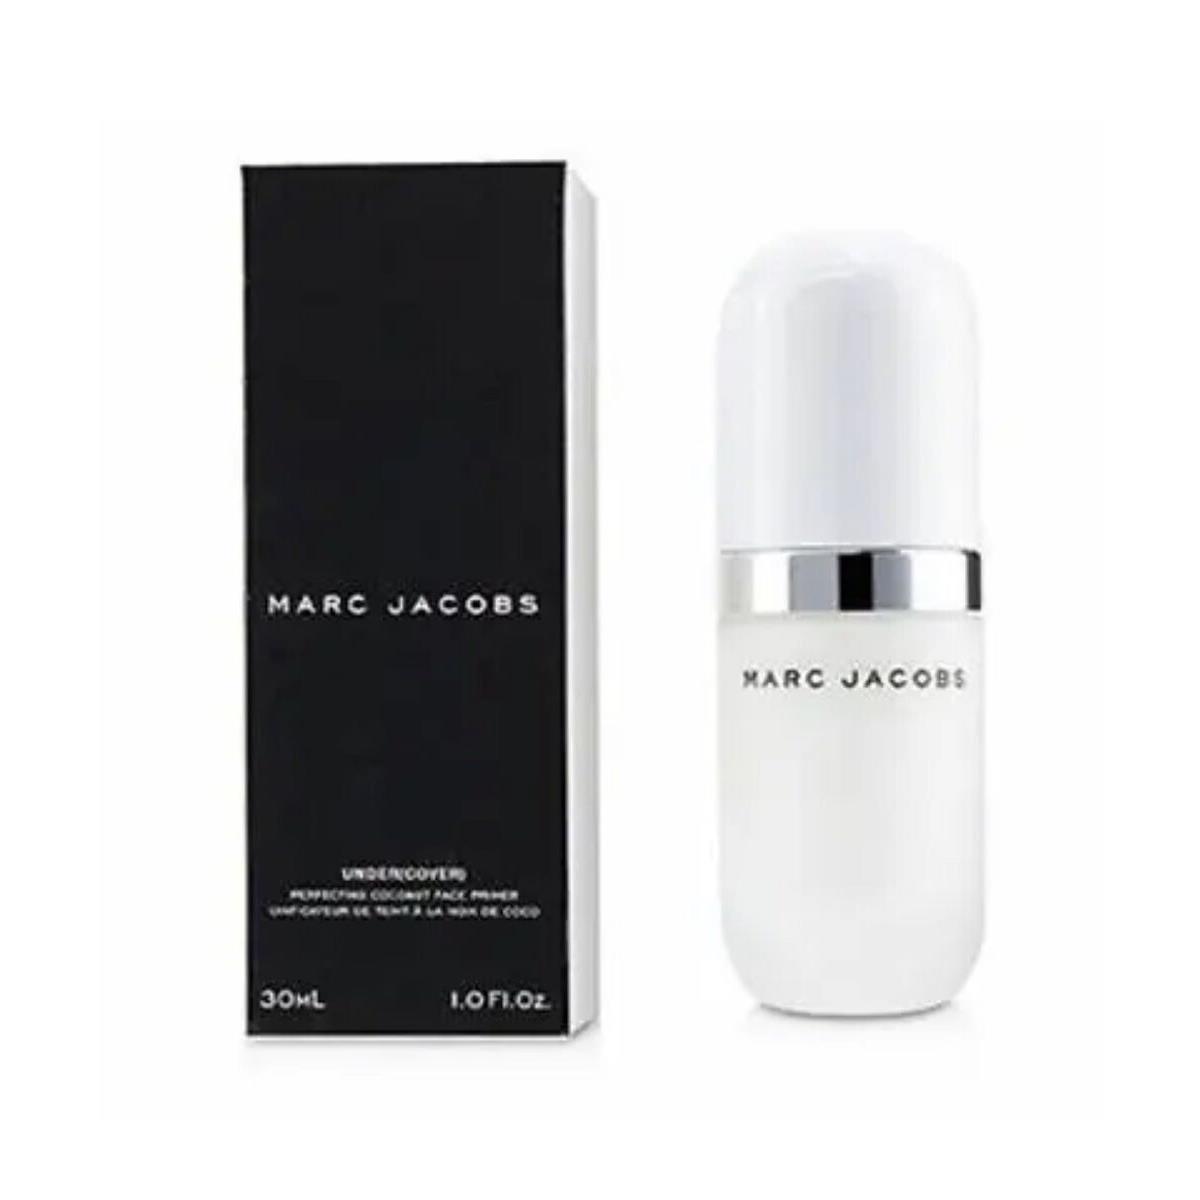 Marc Jacobs: Undercover Perfecting Coconut Face Primer. 1.0 Floz. Now $44-S49